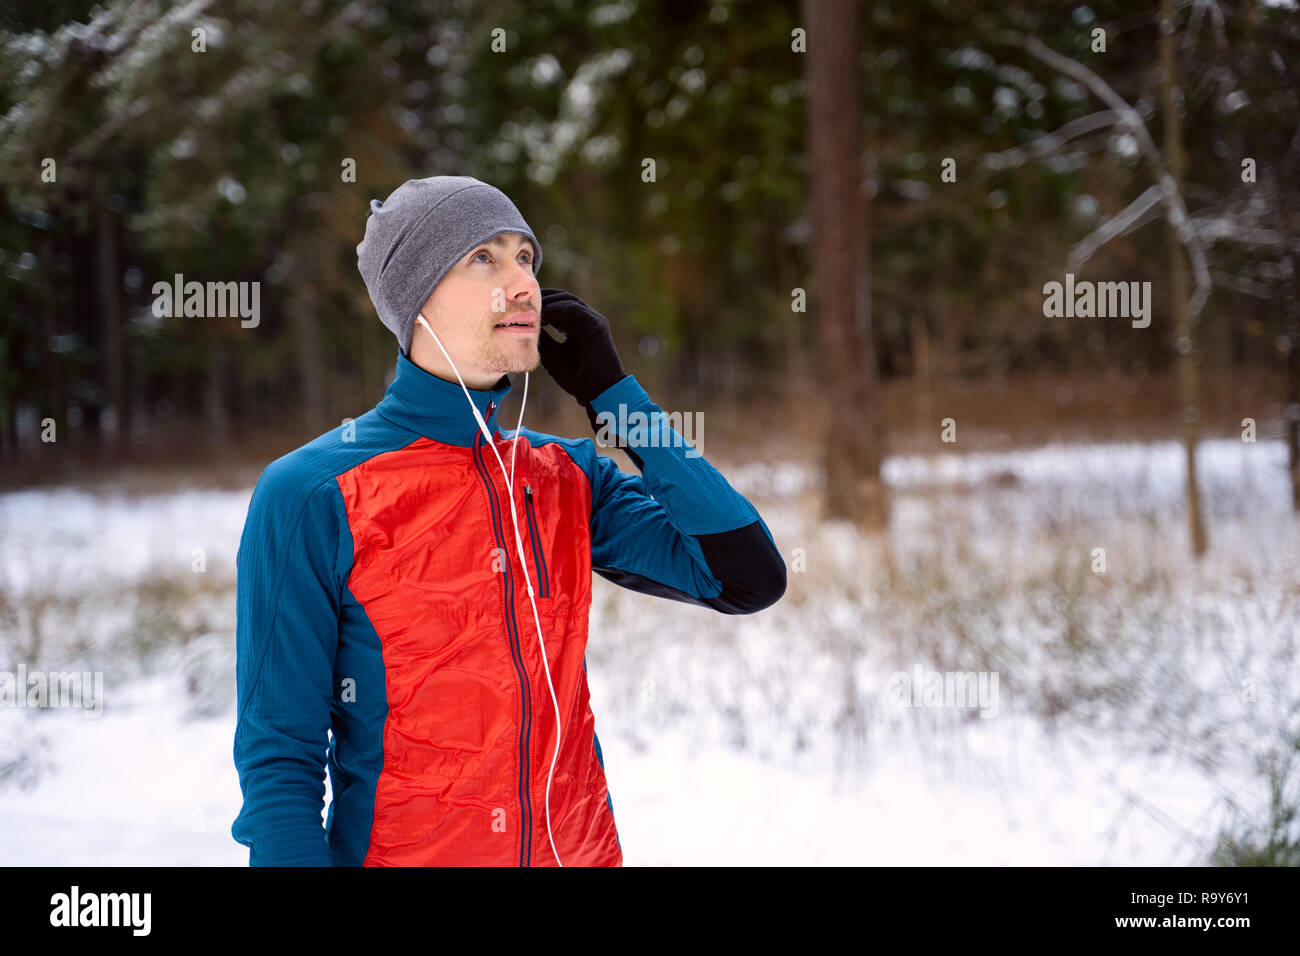 Portrait of a runner dressed in warm sportswear awaiting the start of winter outdoor training. Stock Photo